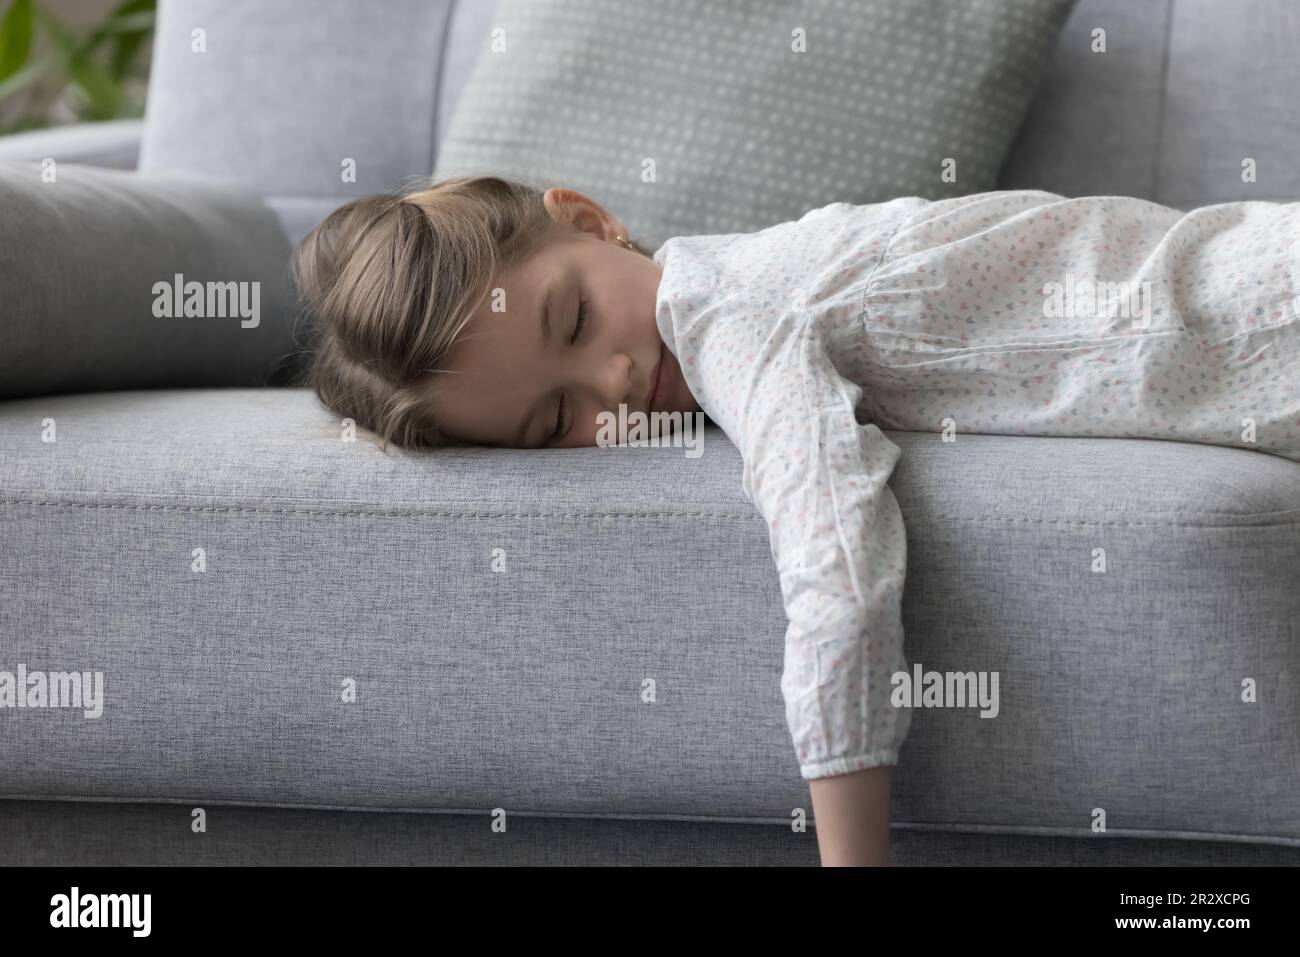 Child closed eyes lying on couch at home rest alone Stock Photo